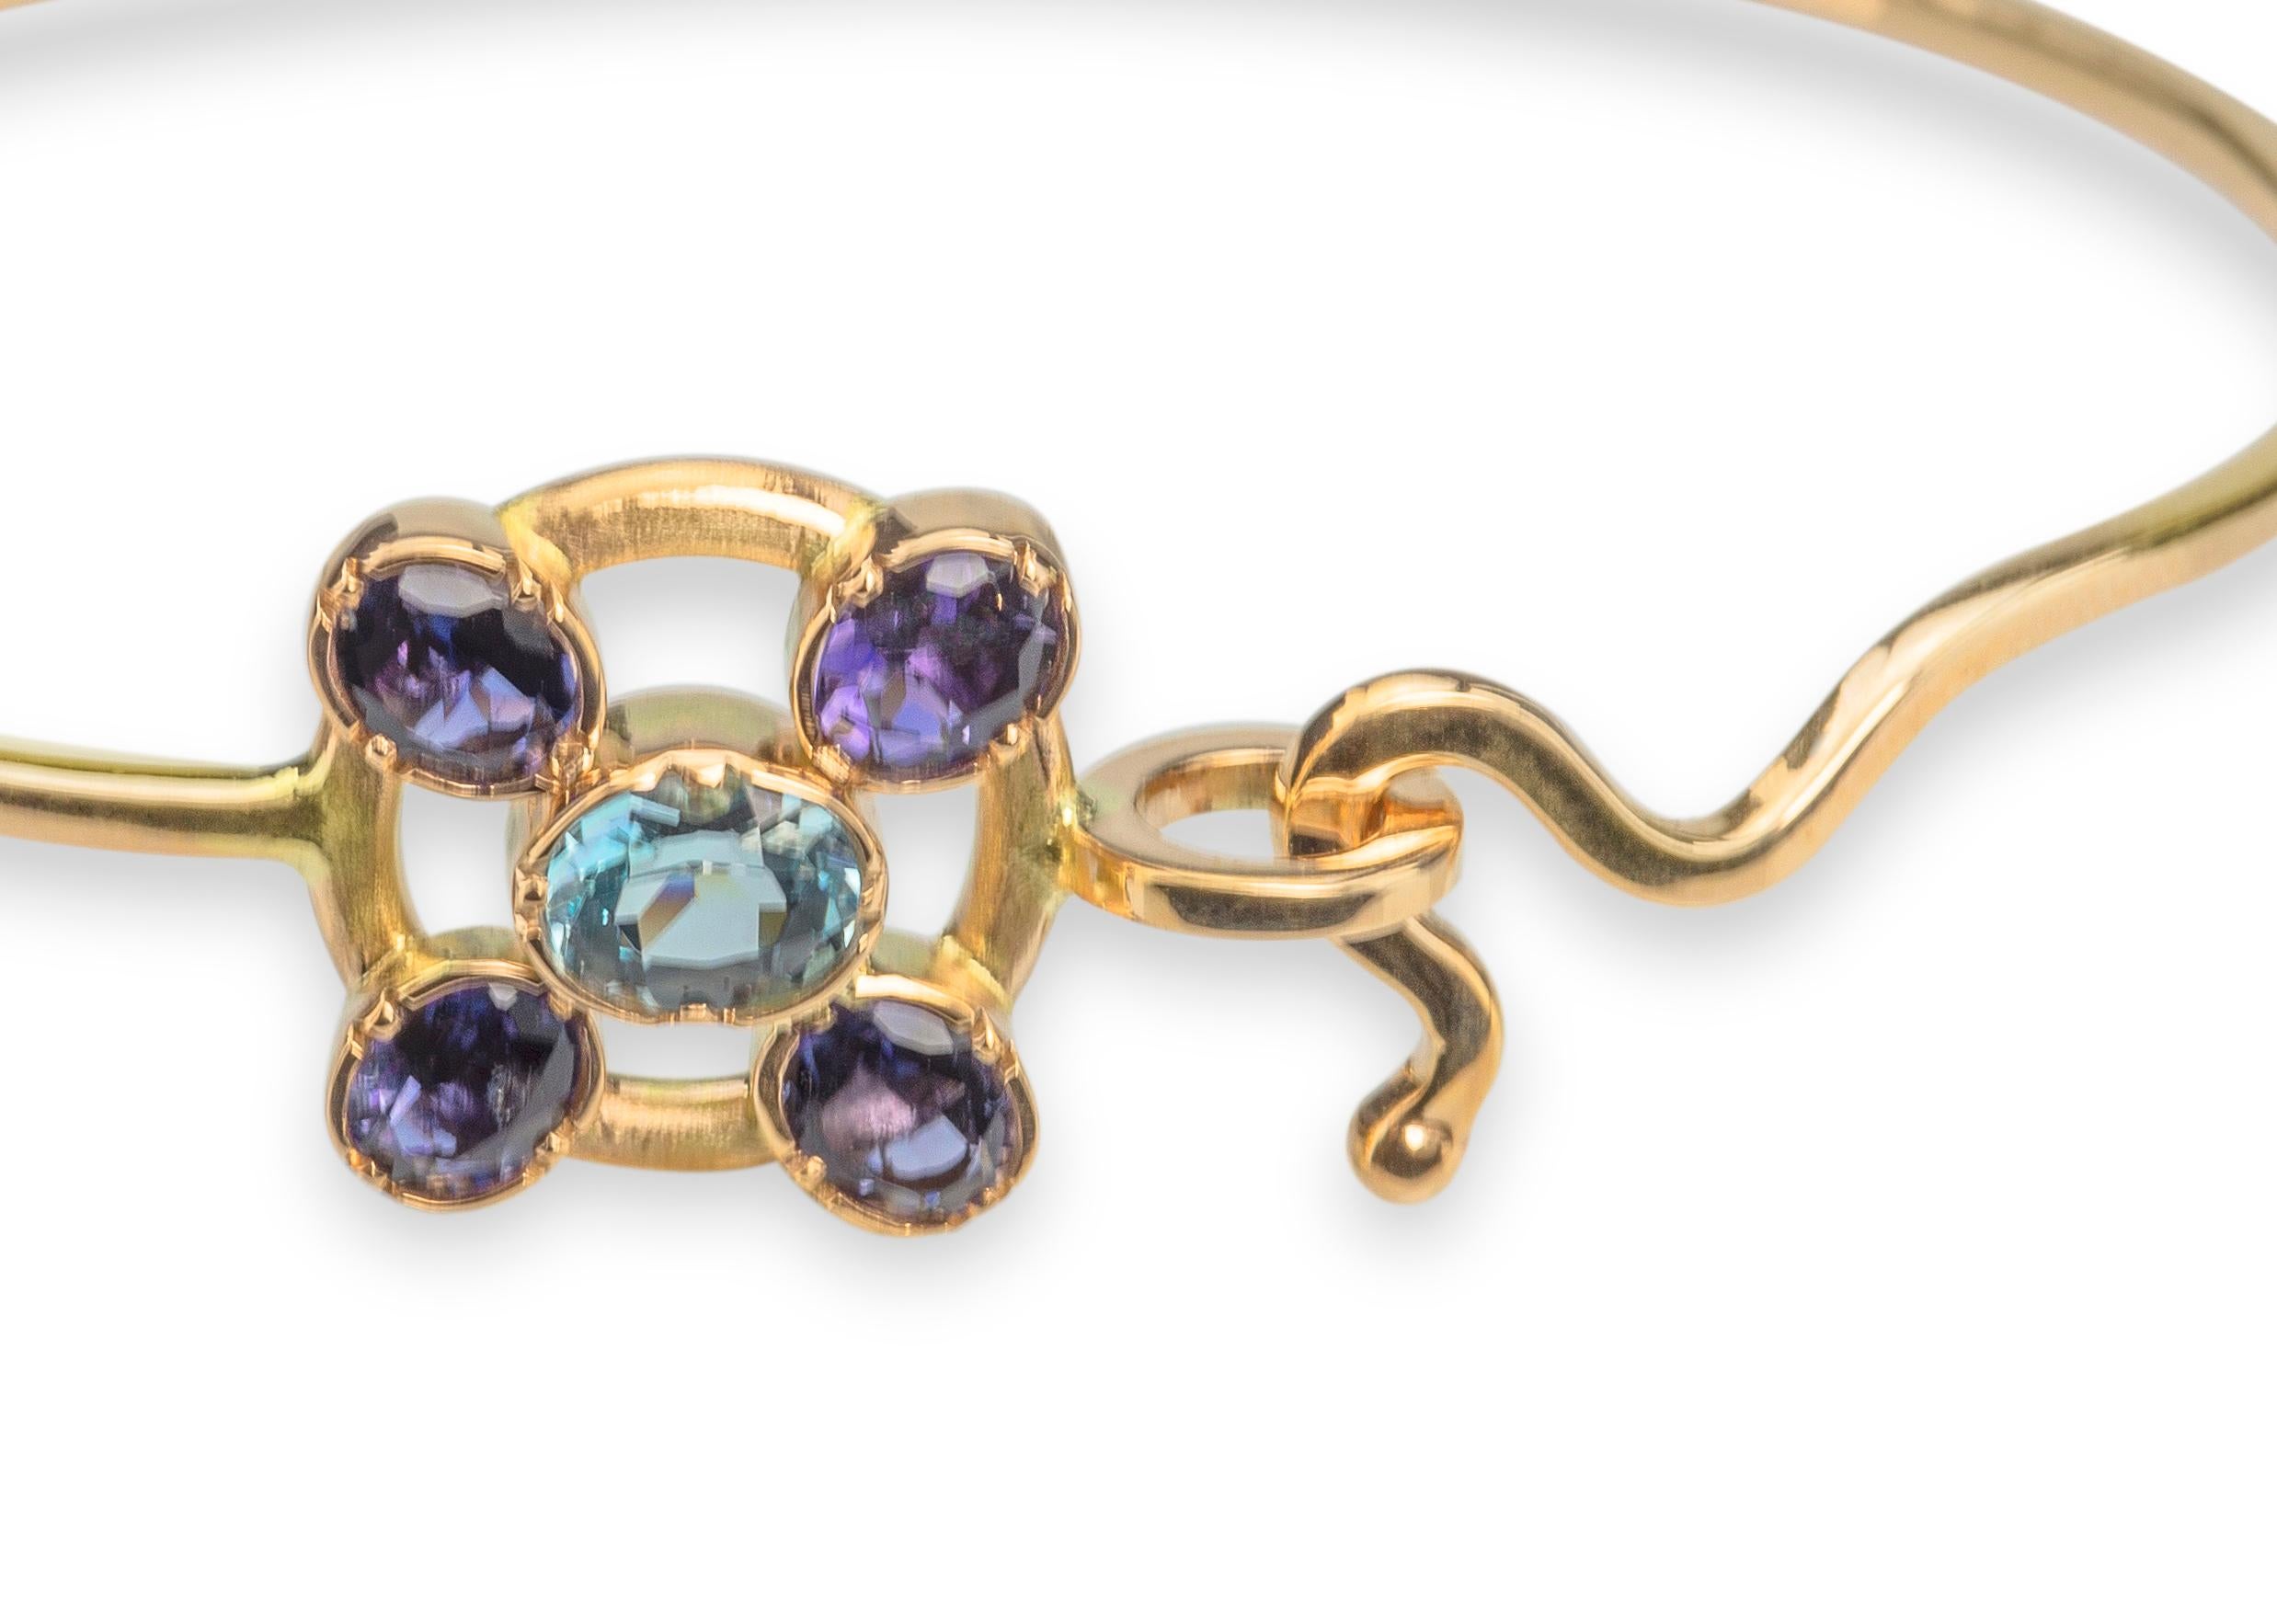 Introducing the exquisite Rossella Ugolini Design Collection, presenting a true masterpiece of jewelry craftsmanship - the handcrafted and hammered 18 Karats Yellow Gold Aquamarine Blue Sapphires Bangle Modern Design Bracelet.  
Crafted with